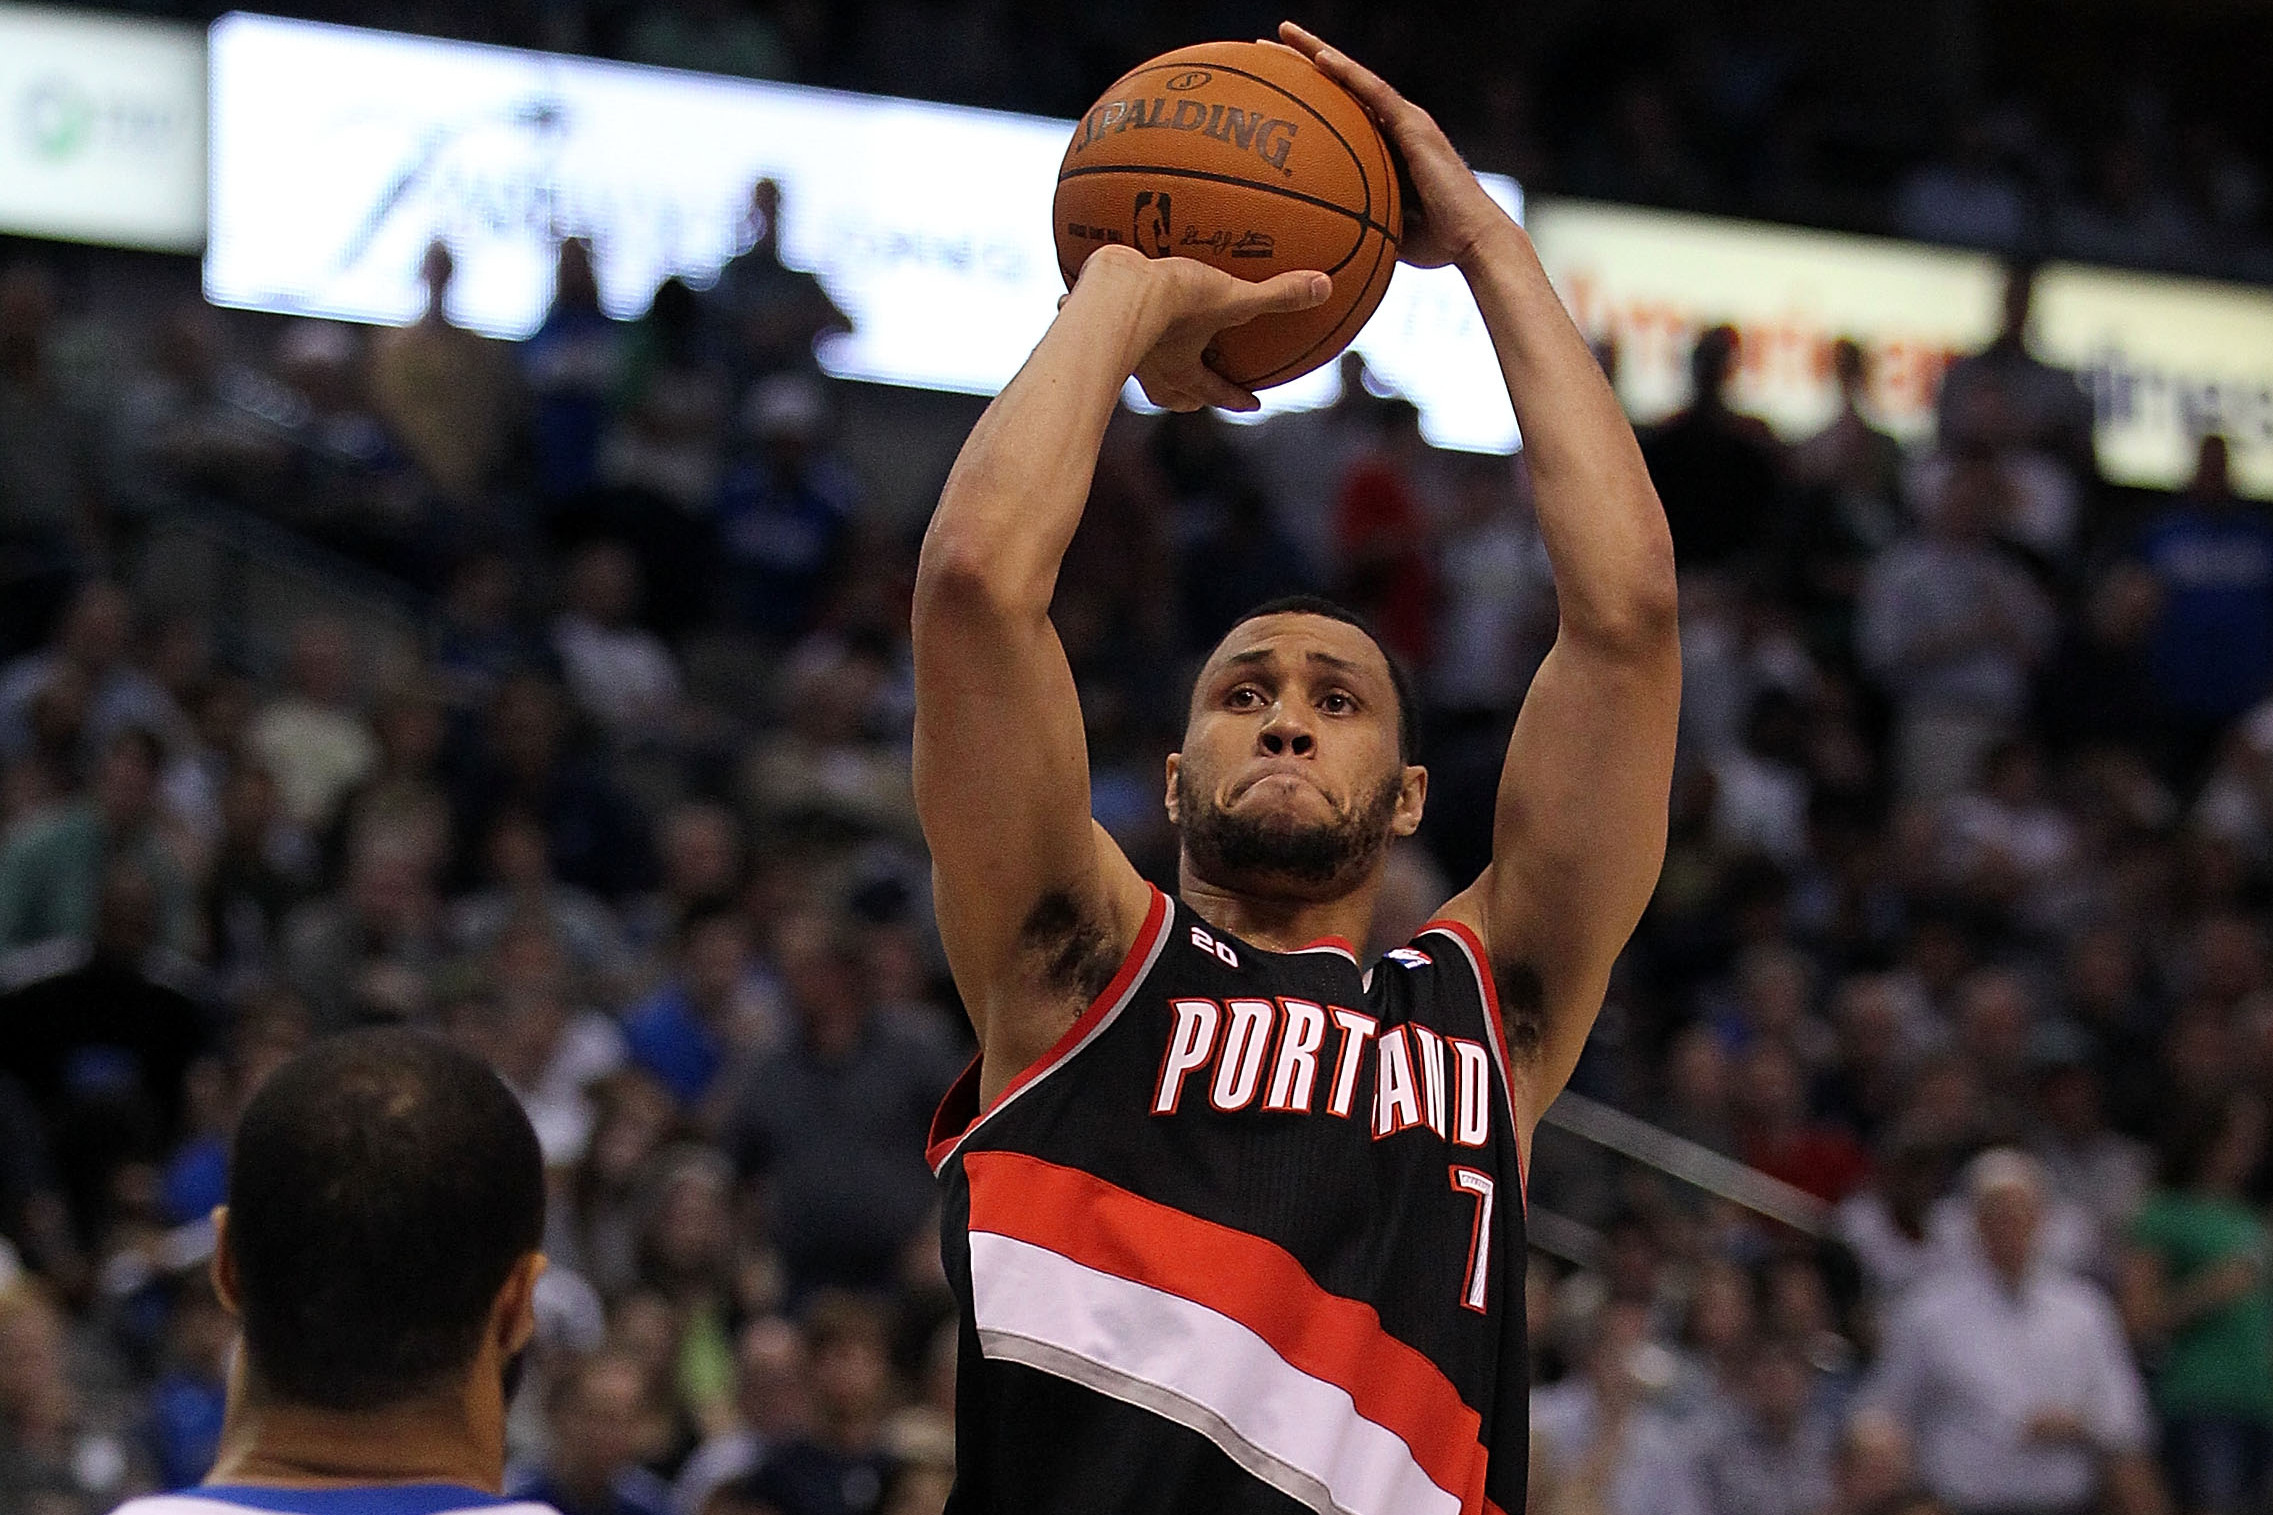 Brandon Roy has filled the basketball void in his life through